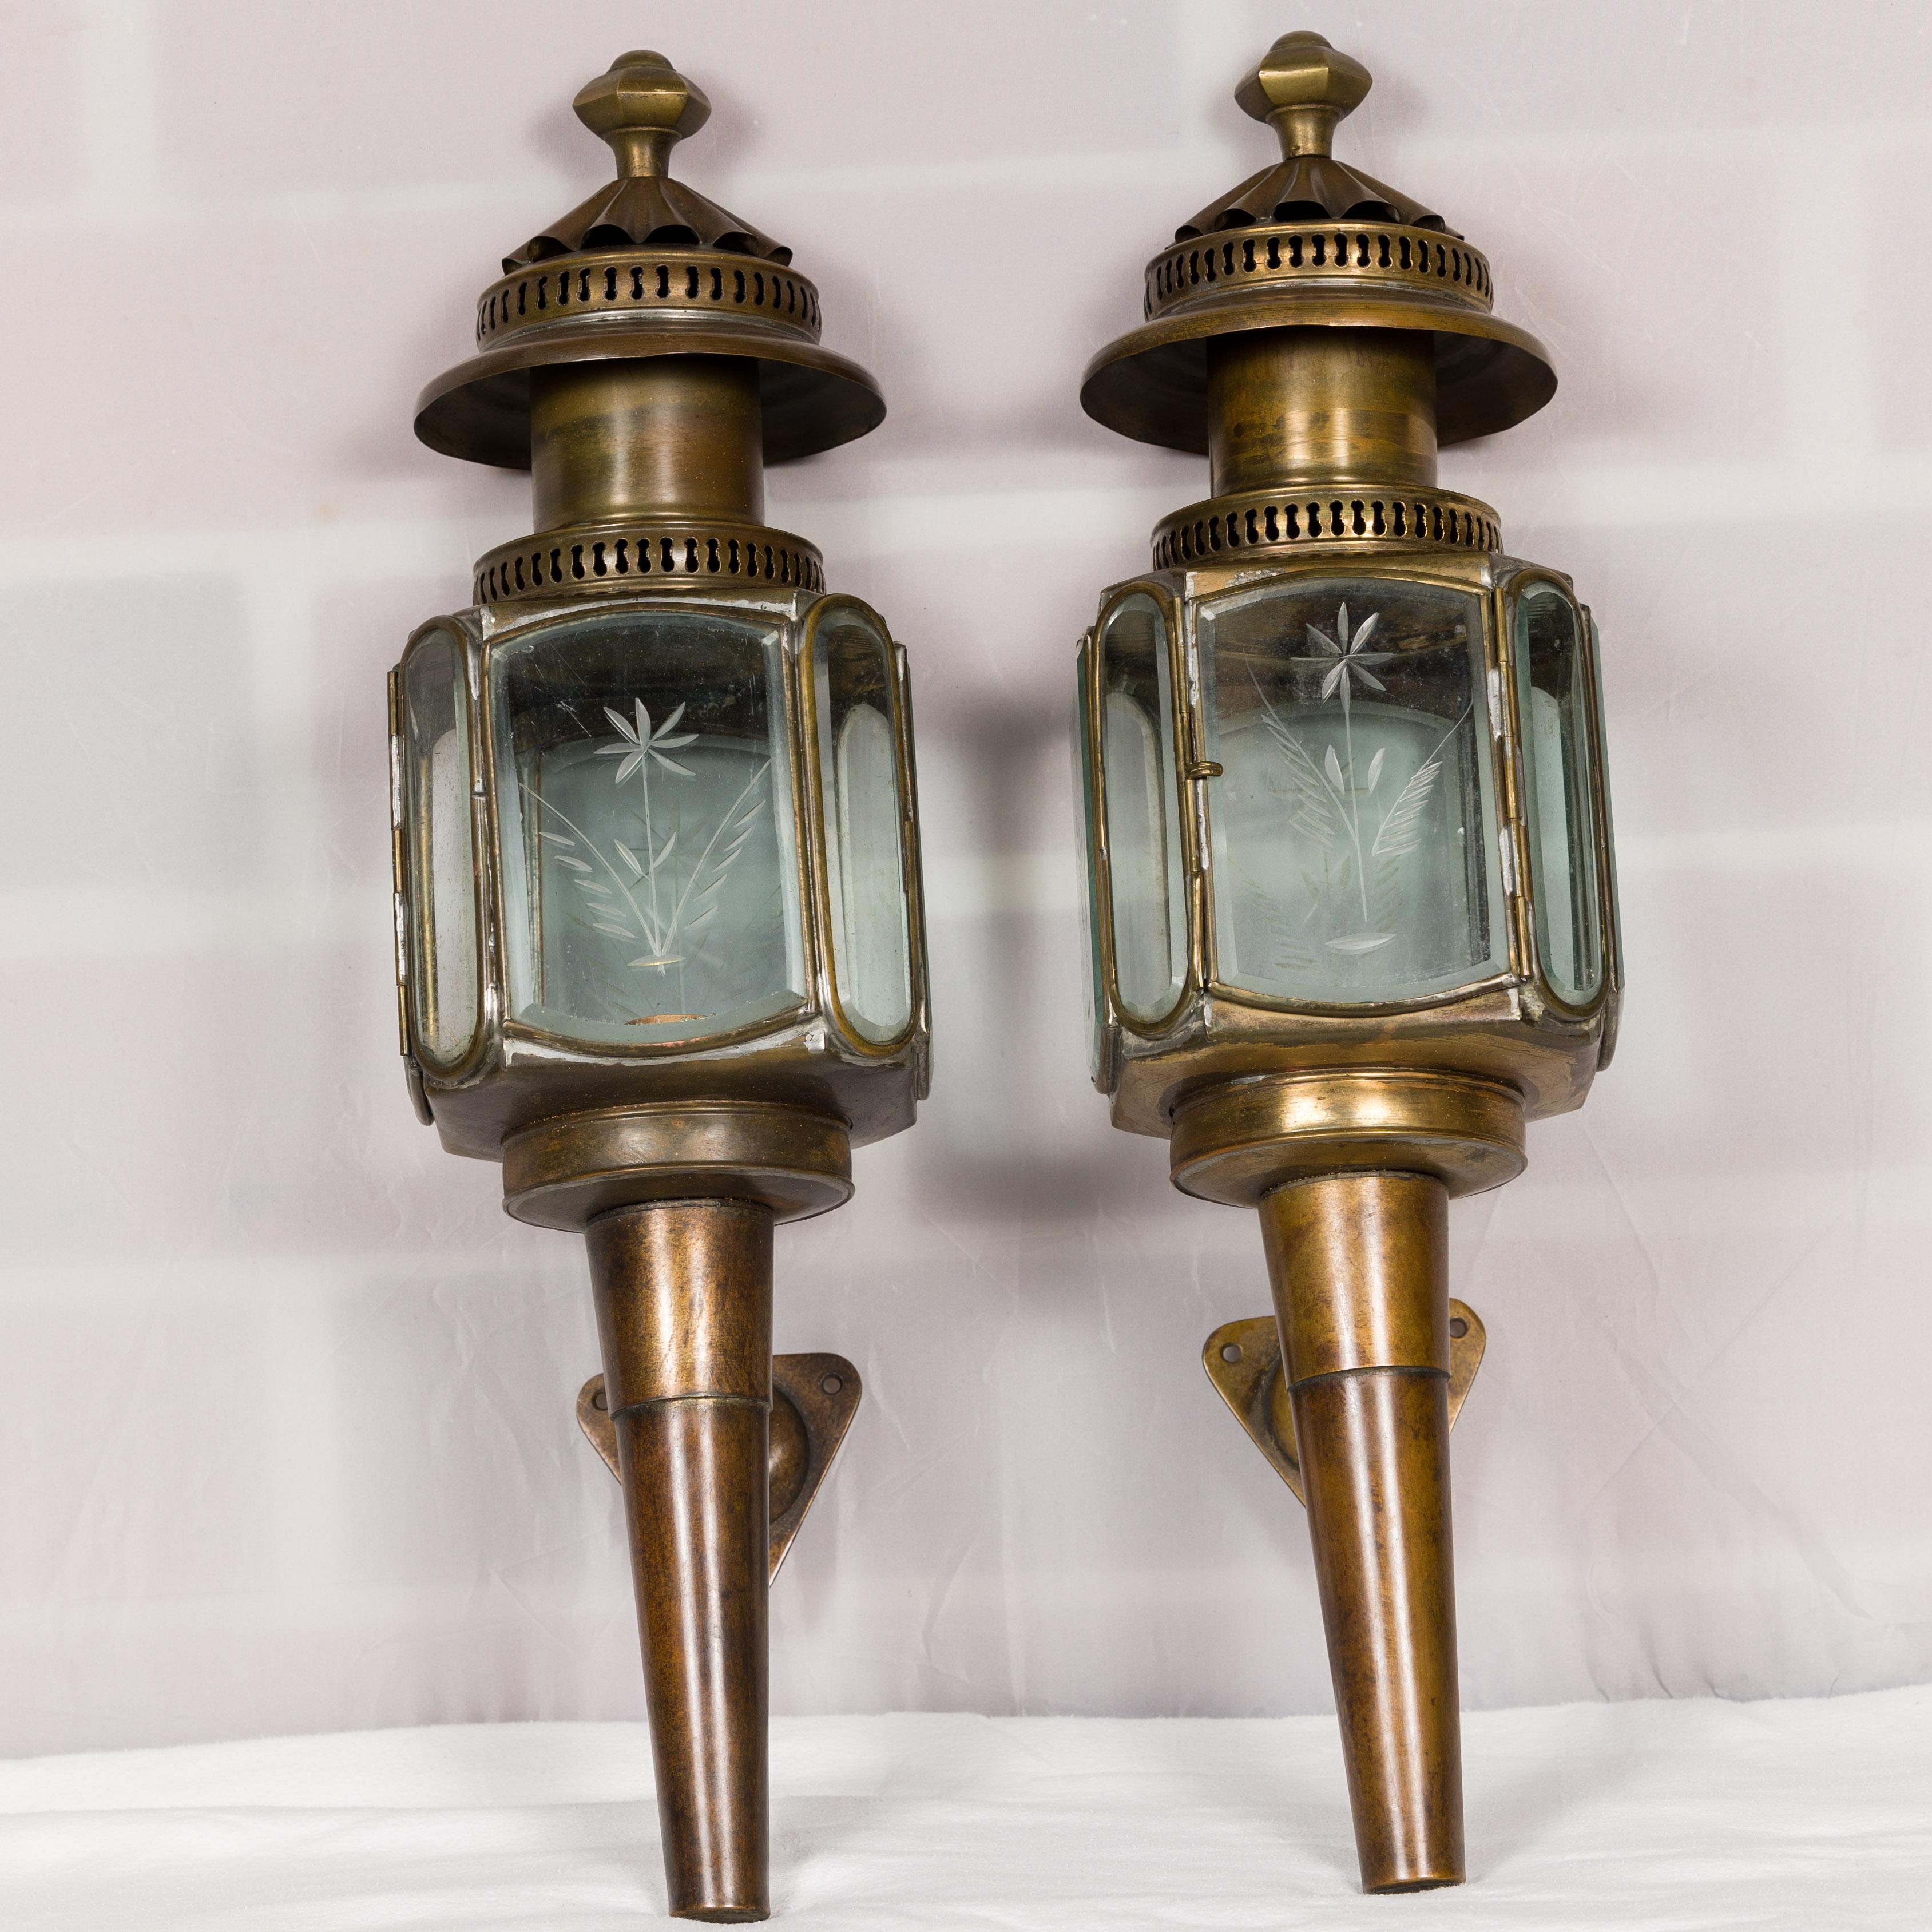 20th Century Pair of American Turn of the Century Wall Lanterns with Etched Glass, circa 1900 For Sale